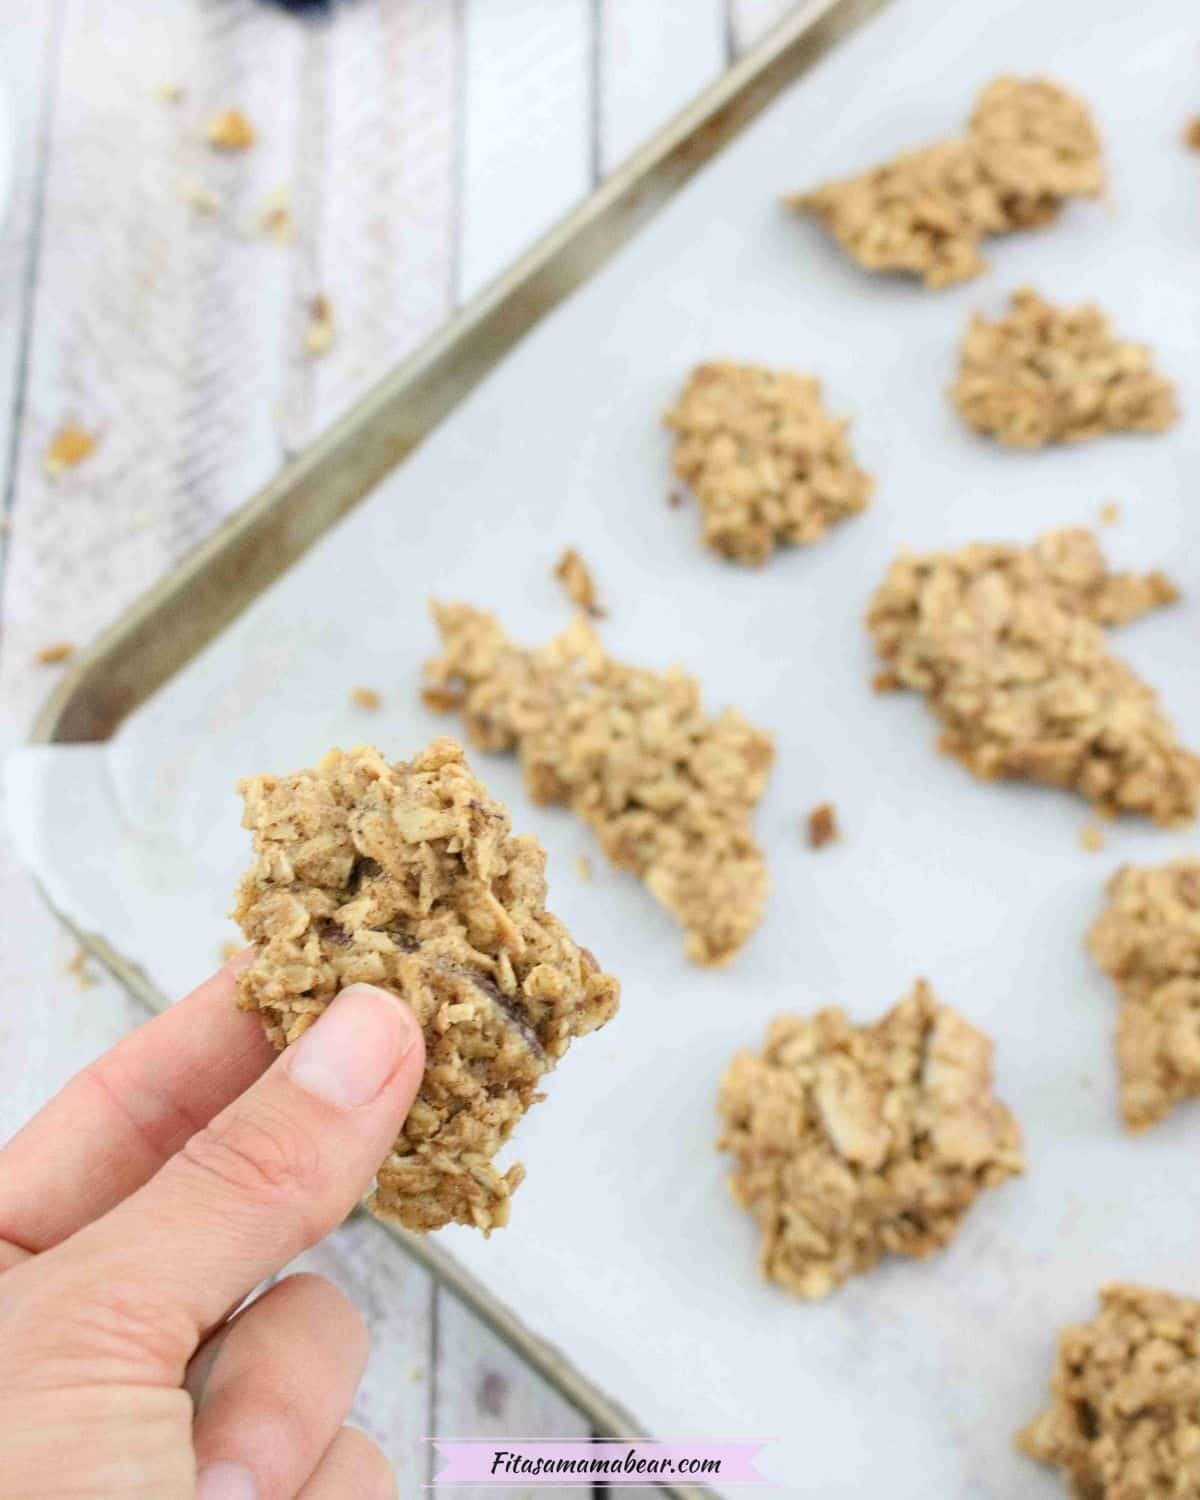 Baking sheet lined with parchment paper with granola clusters on it and a hand holding on cluster close up